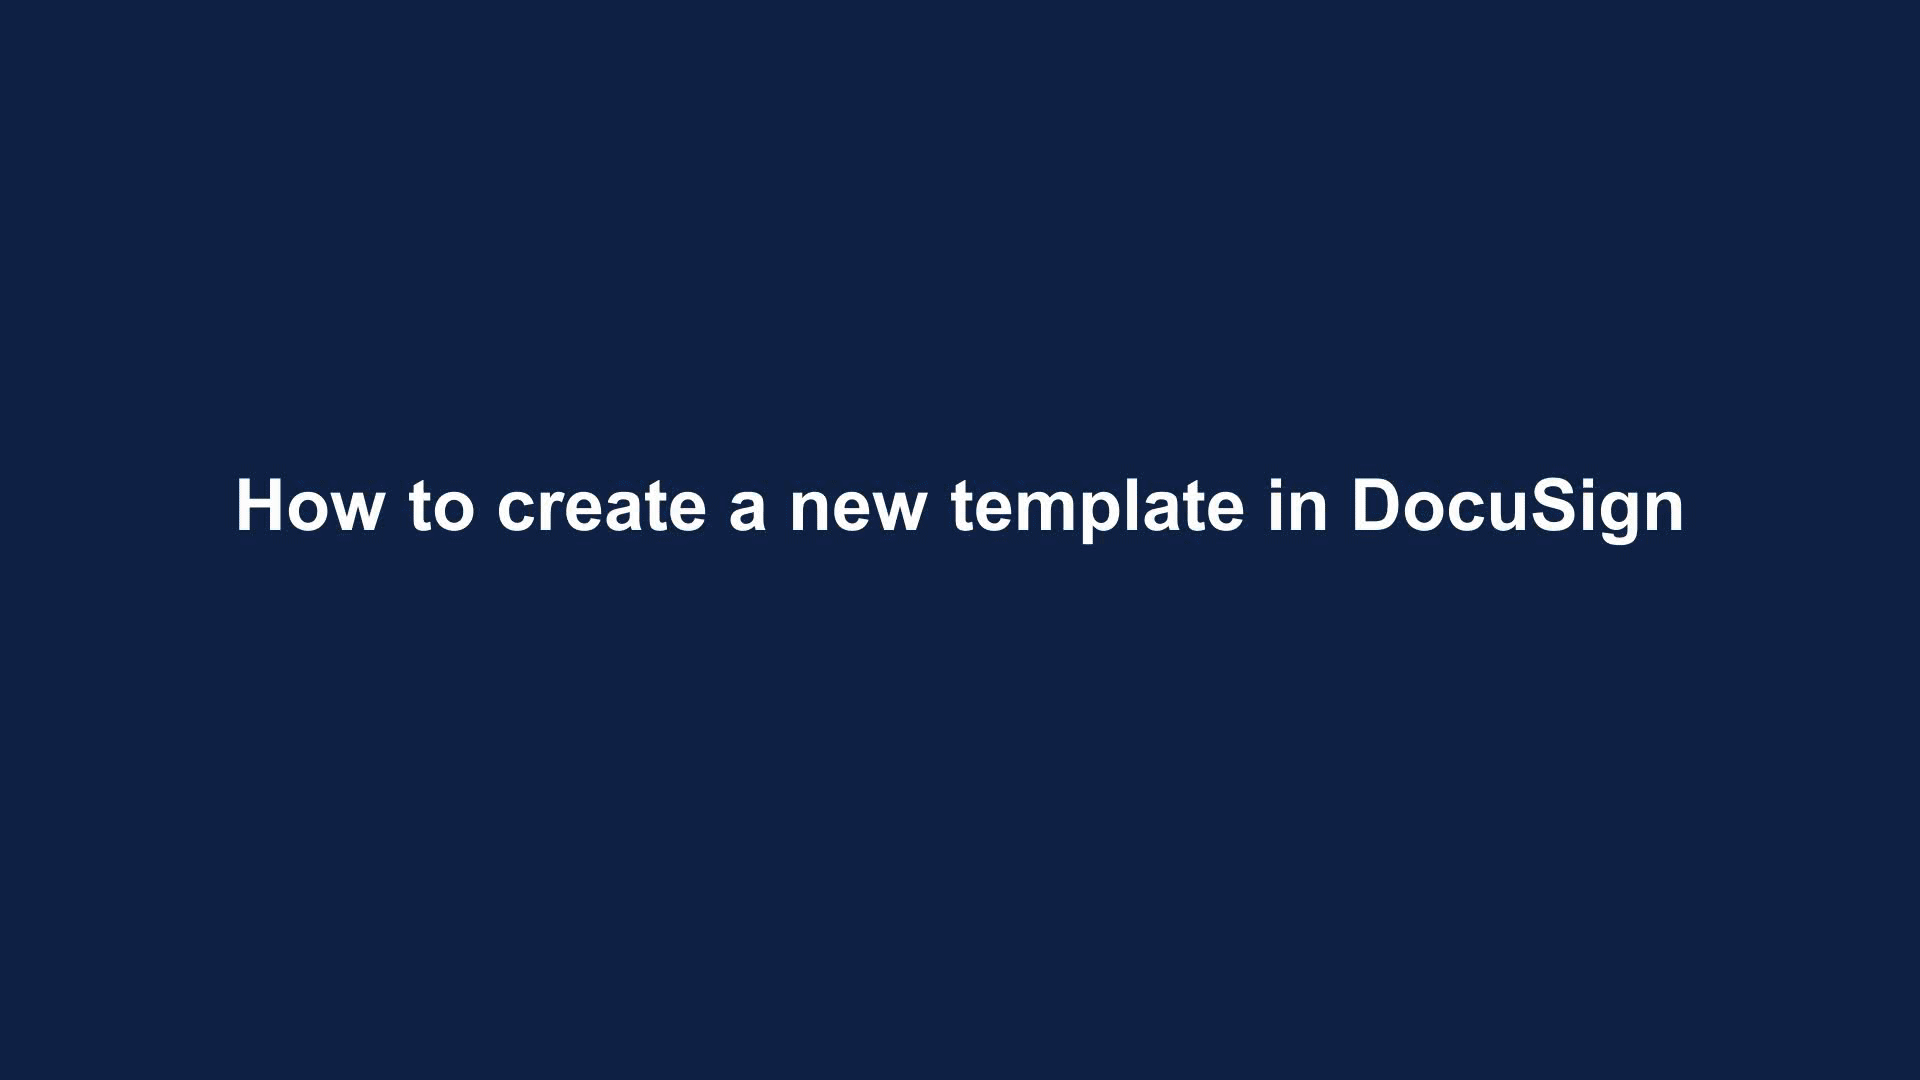 docusign-template-creation-youtube